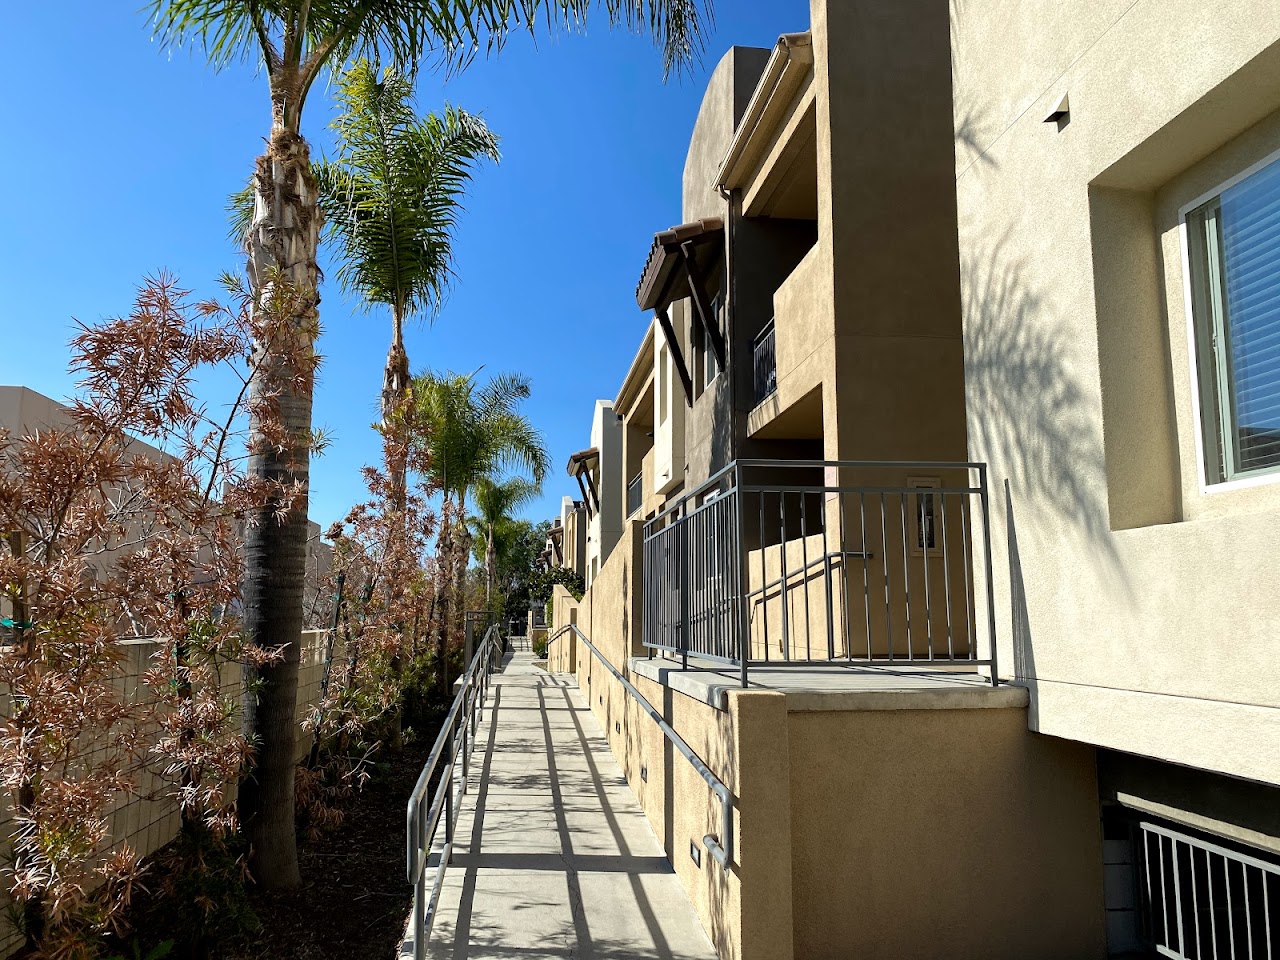 Photo of VENTALISO II. Affordable housing located at 609 RICHMAR AVENUE SAN MARCOS, CA 92128